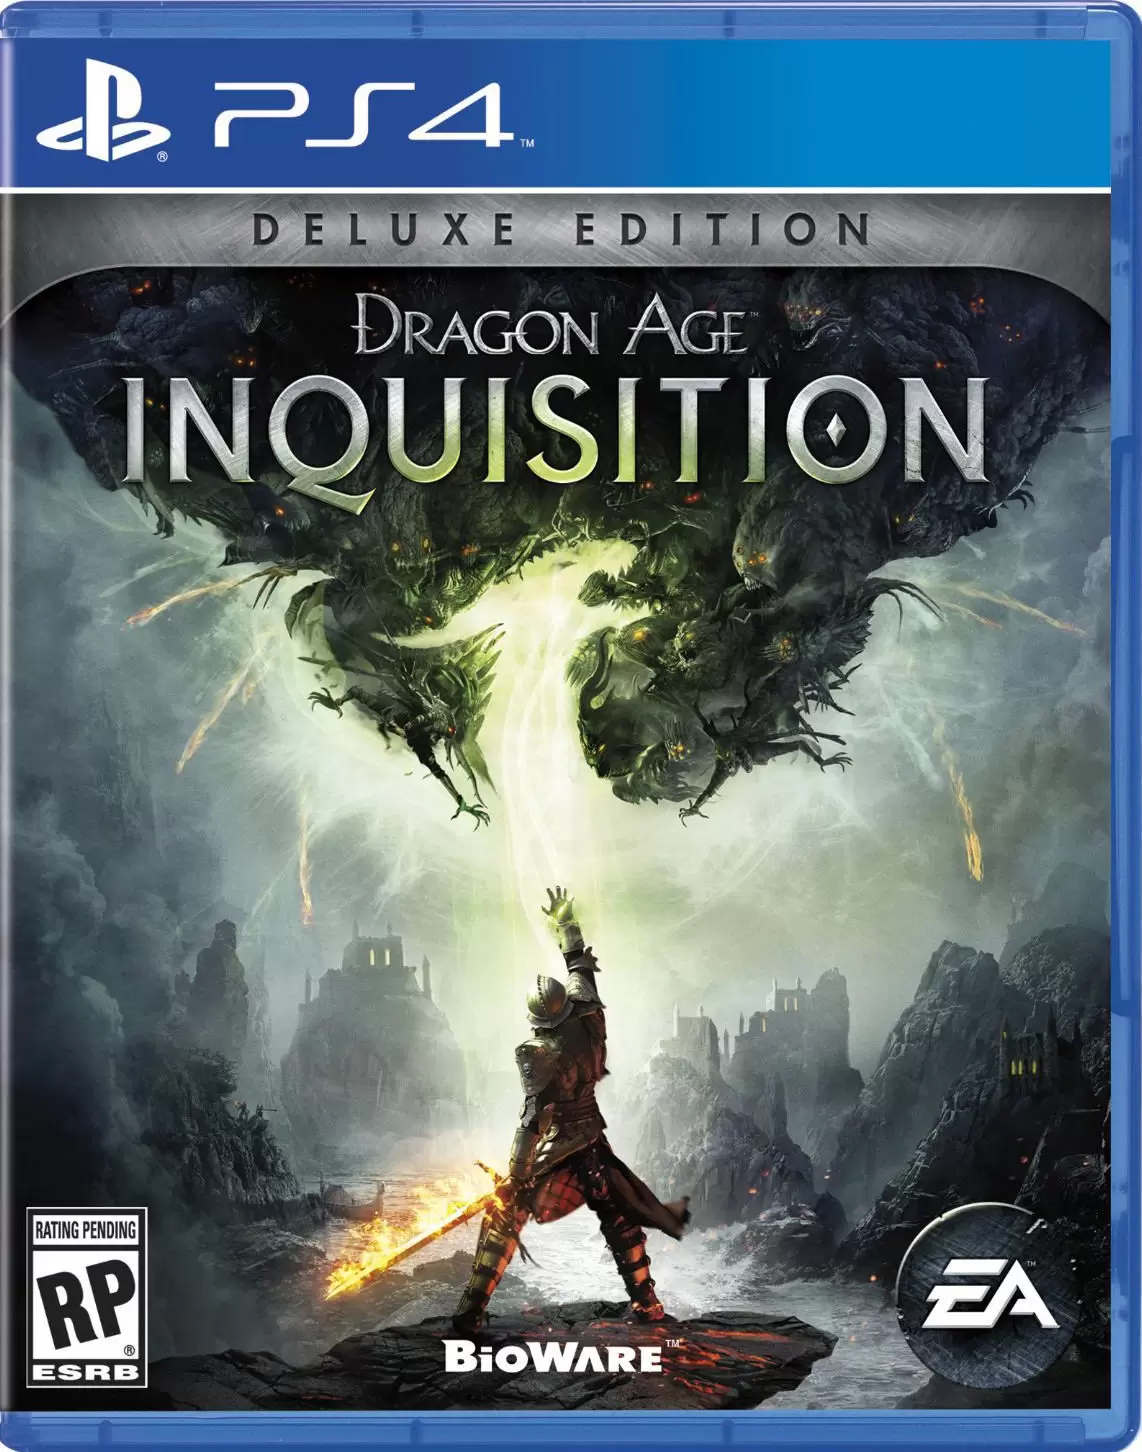 PS4 Games - Dragon Age Inquisition: Deluxe Edition